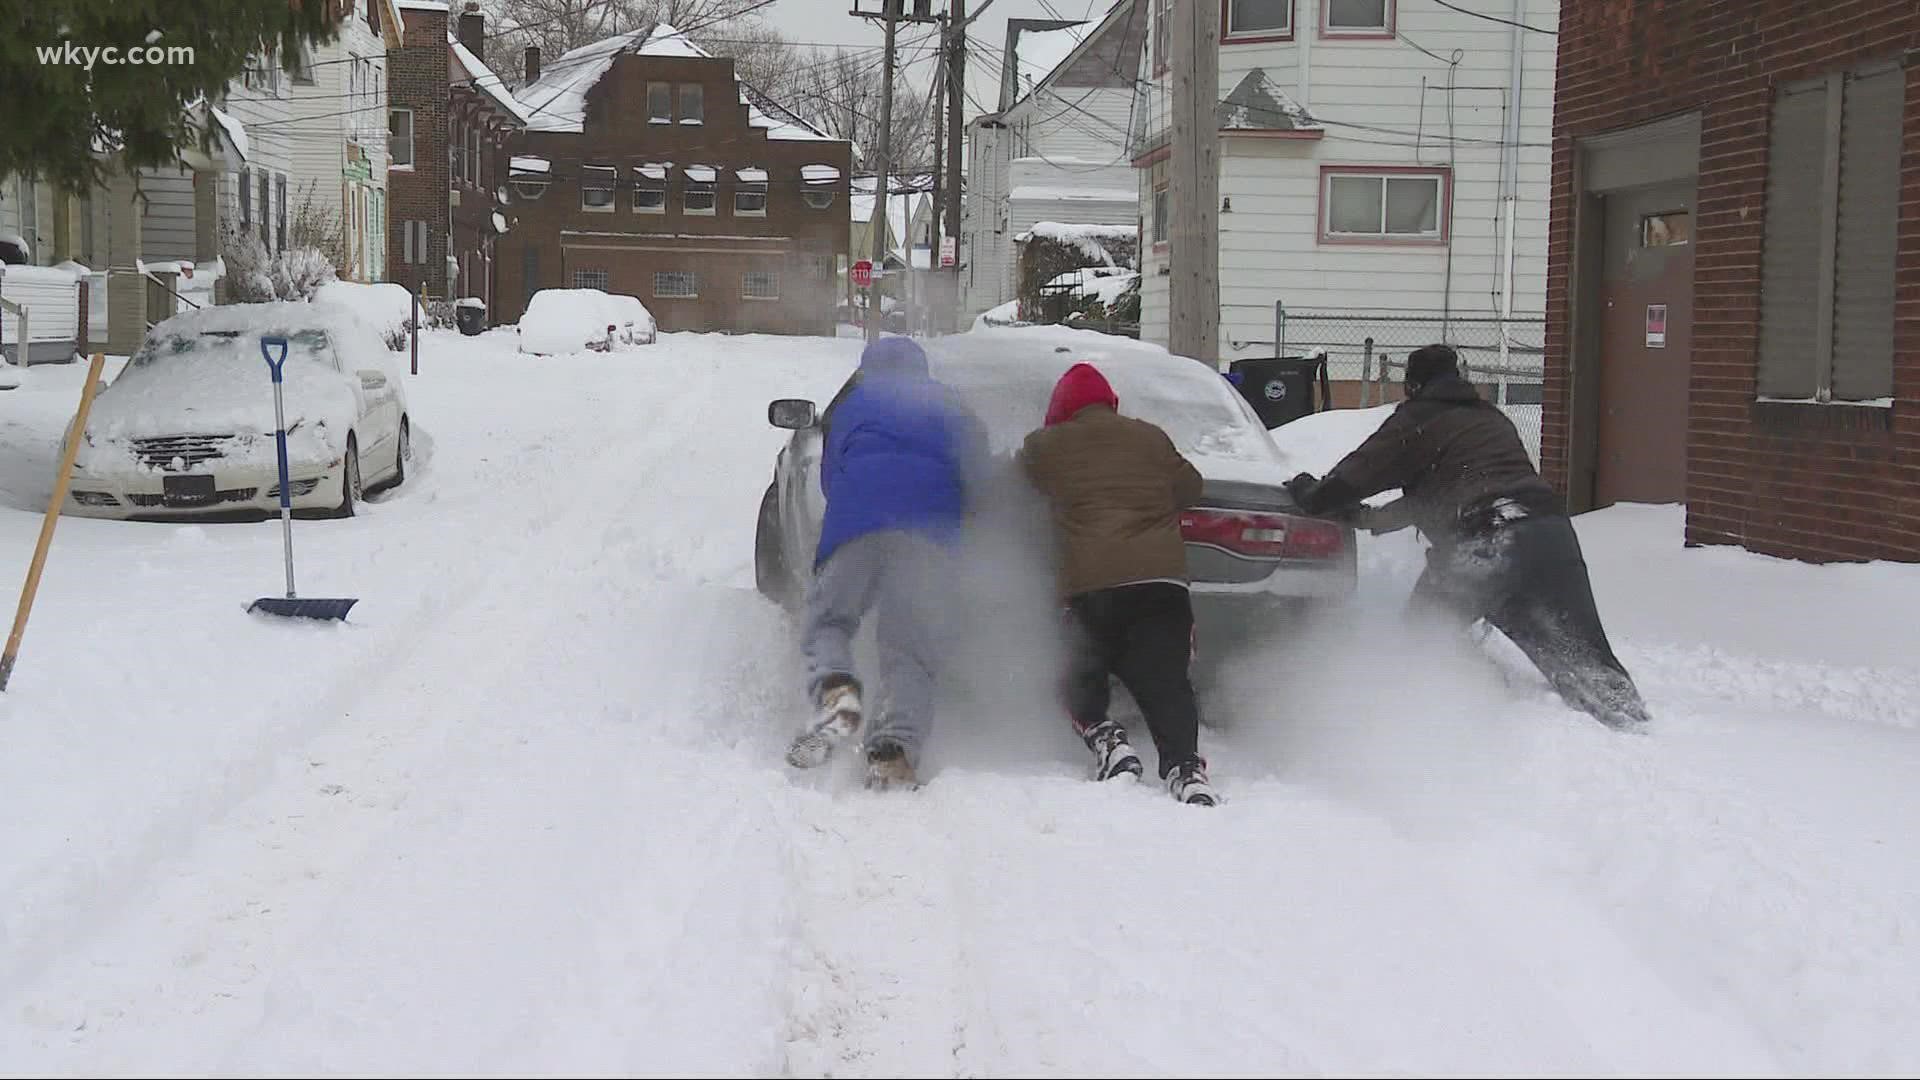 Residents and city leaders weigh in on city's response to last winter ahead of Wednesday